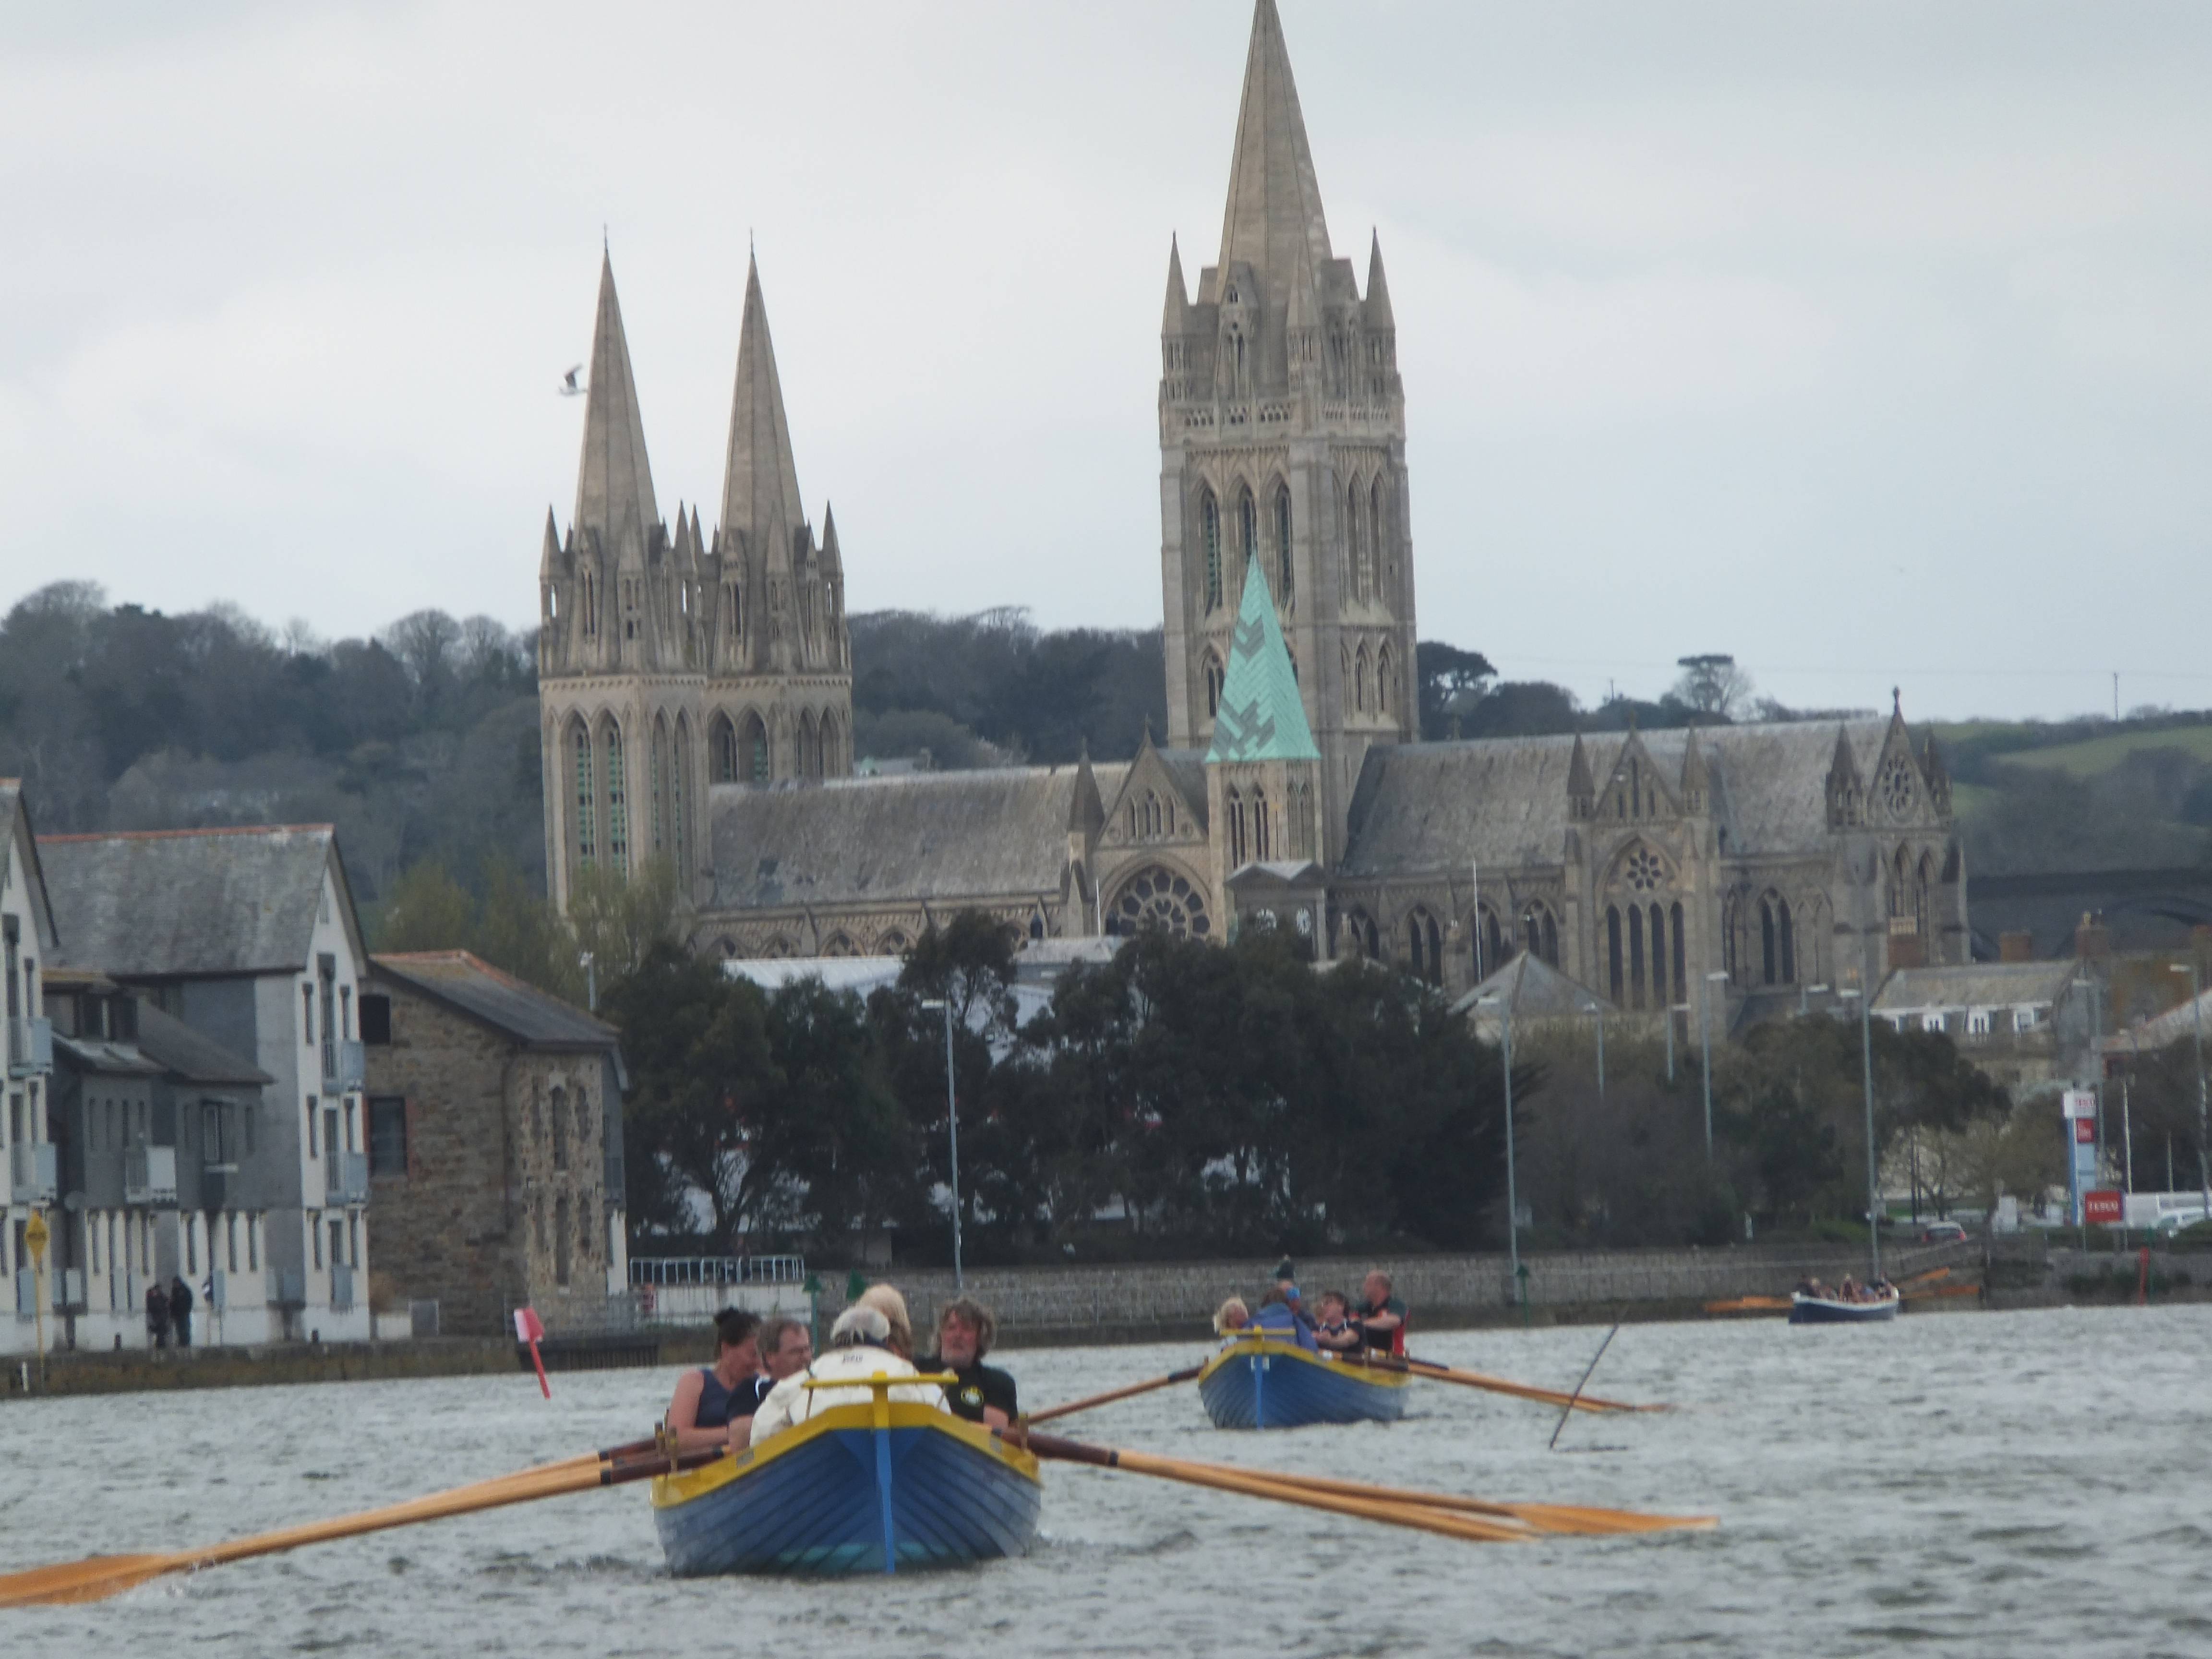 Gigs rowing to Truro